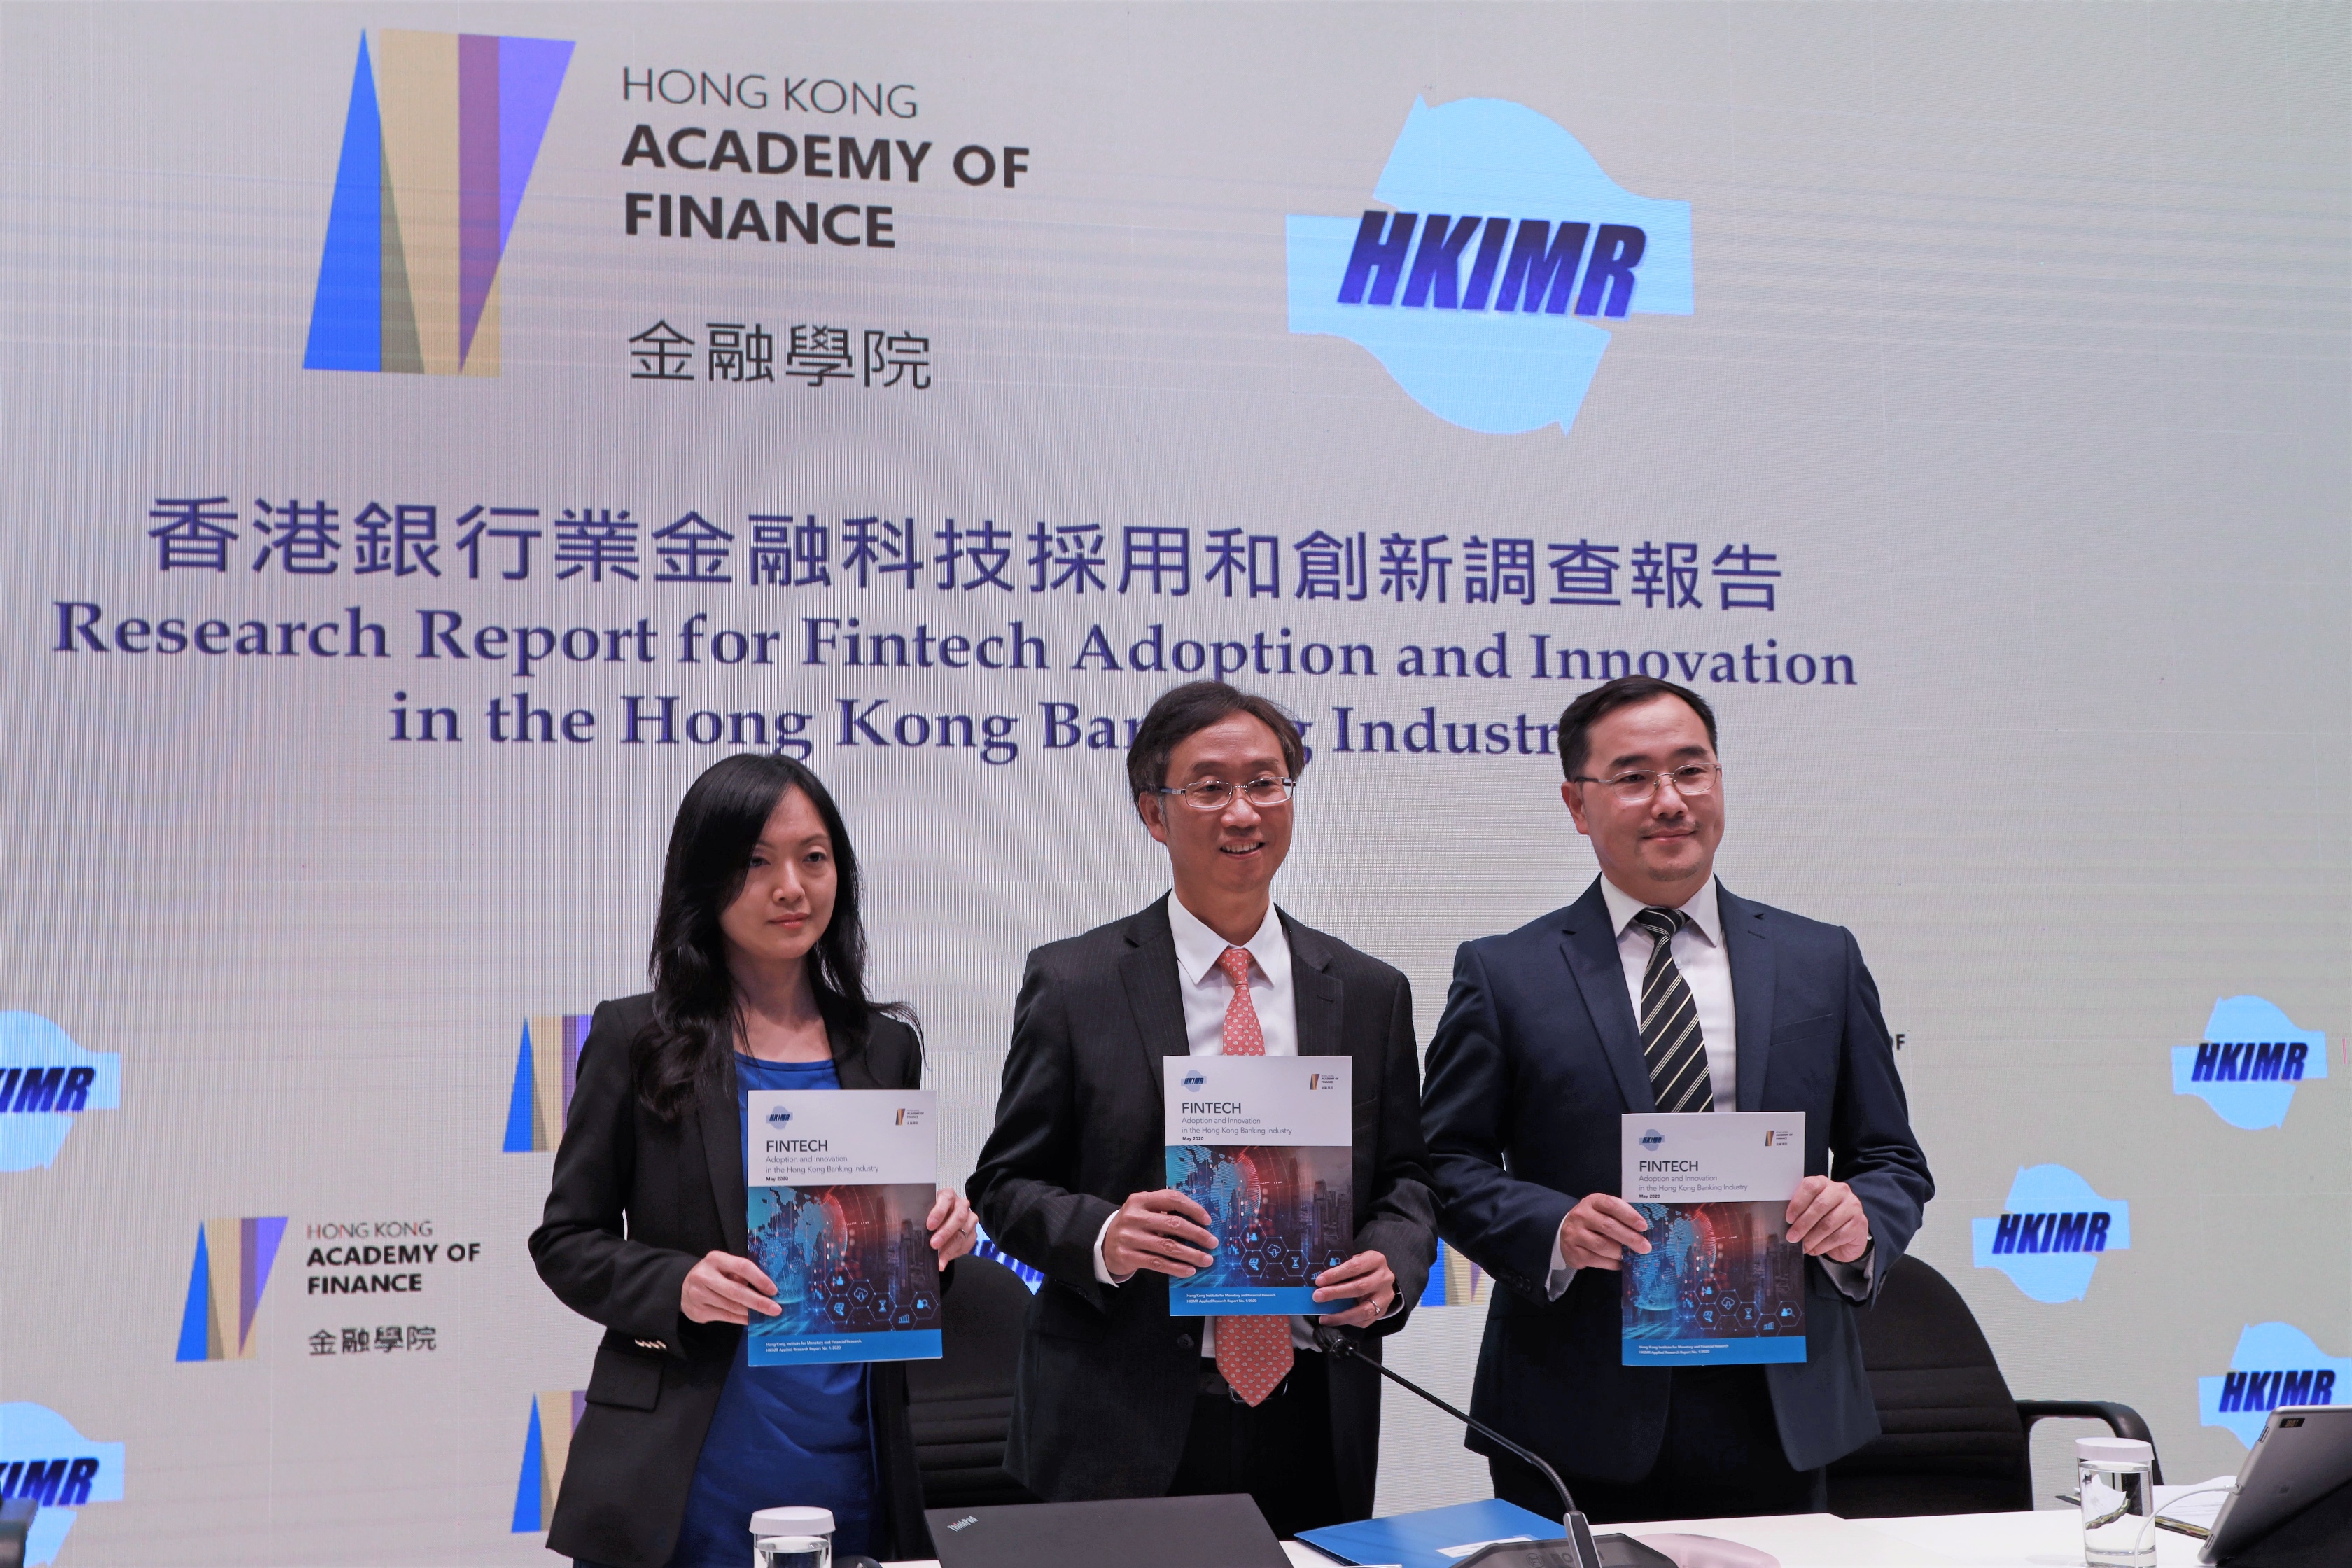 The Hong Kong Institute for Monetary and Financial Research (HKIMR), the research arm and subsidiary of the Hong Kong Academy of Finance (AoF), publishes the first in a series of Applied Research reports, titled “Fintech Adoption and Innovation in the Hong Kong Banking Industry”. Mr Edmond Lau, Senior Executive Director of the HKMA (centre), Ms Lillian Cheung, Executive Director (Research) (left) and Mr Colin Pou, Executive Director (Financial Infrastructure) (right), host a press conference to share the key findings of the report and the latest development of Fintech adoption in the Hong Kong banking industry.